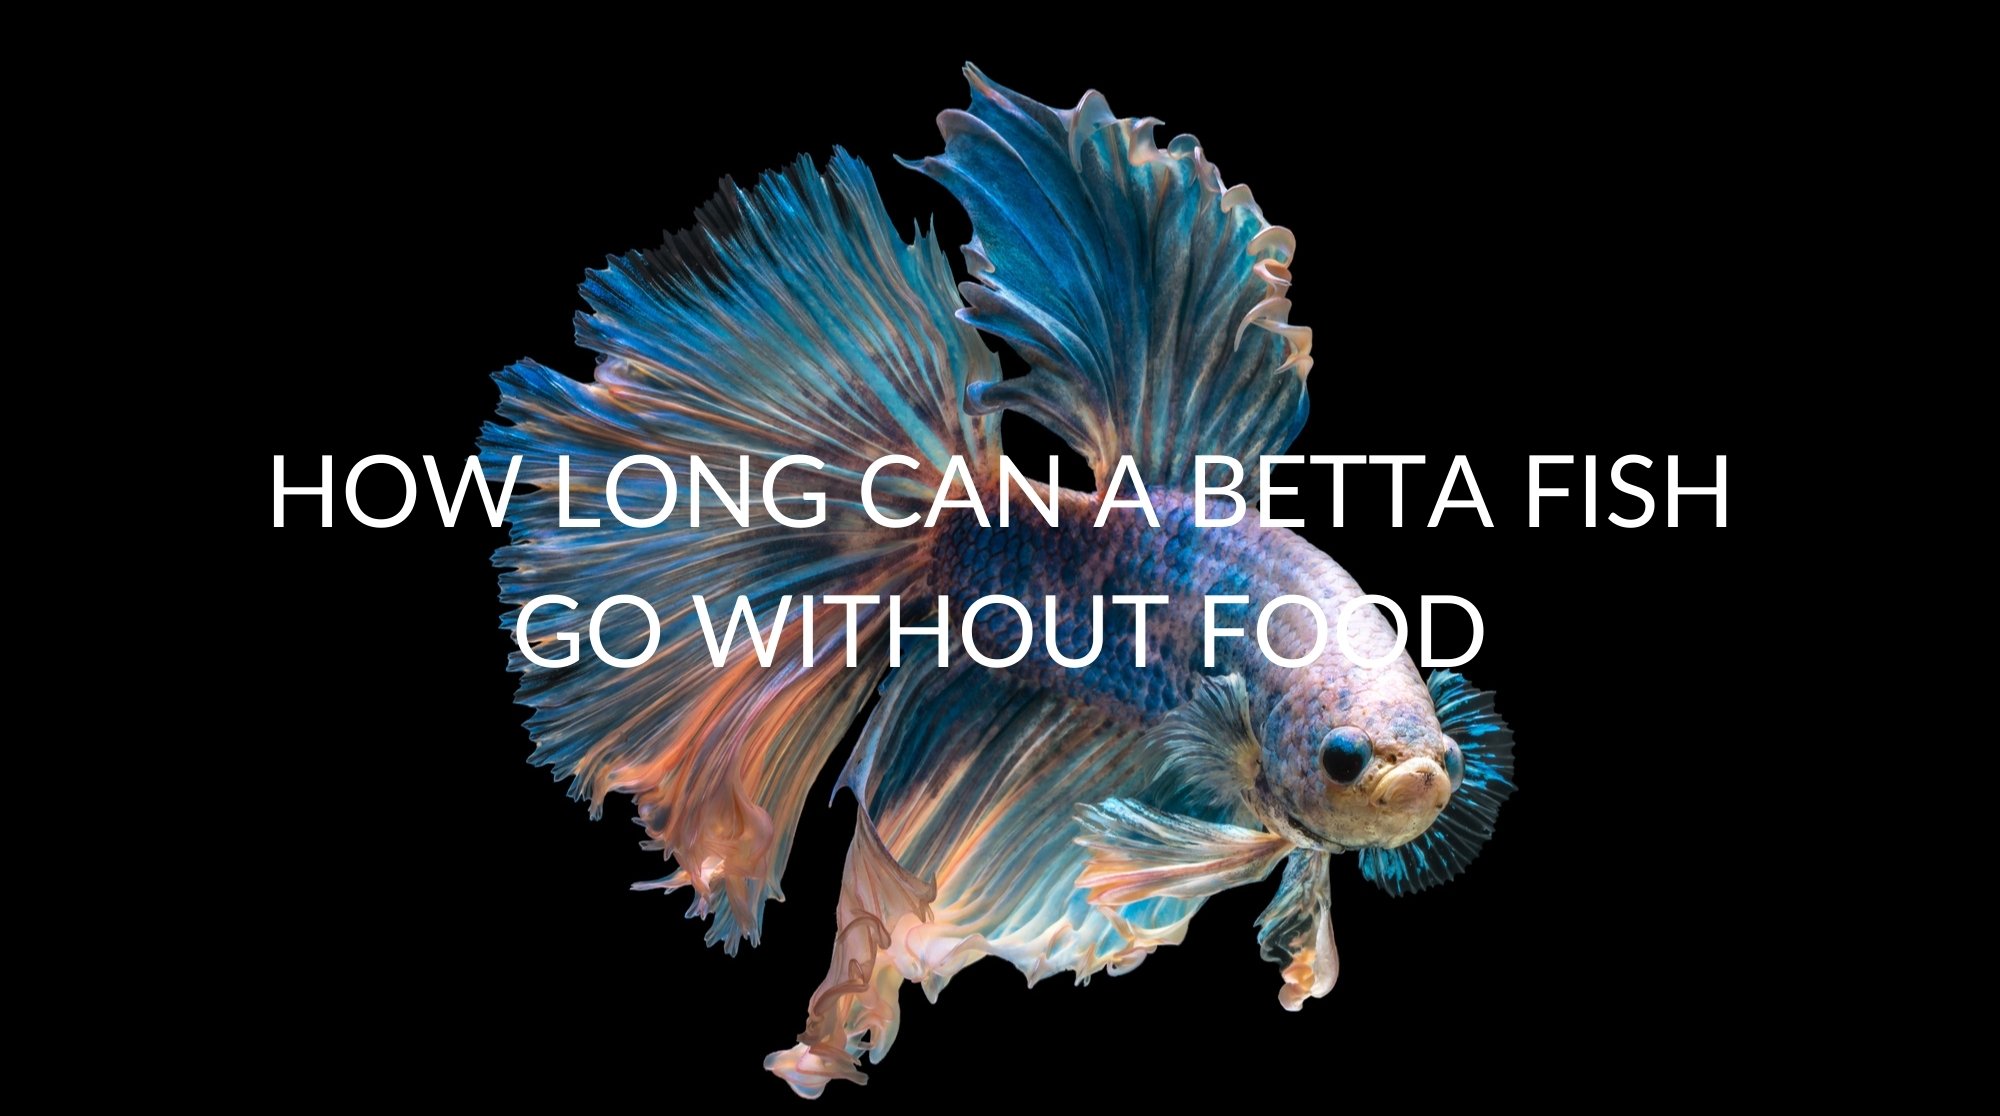 Betta Fish How Long Without Food? 2